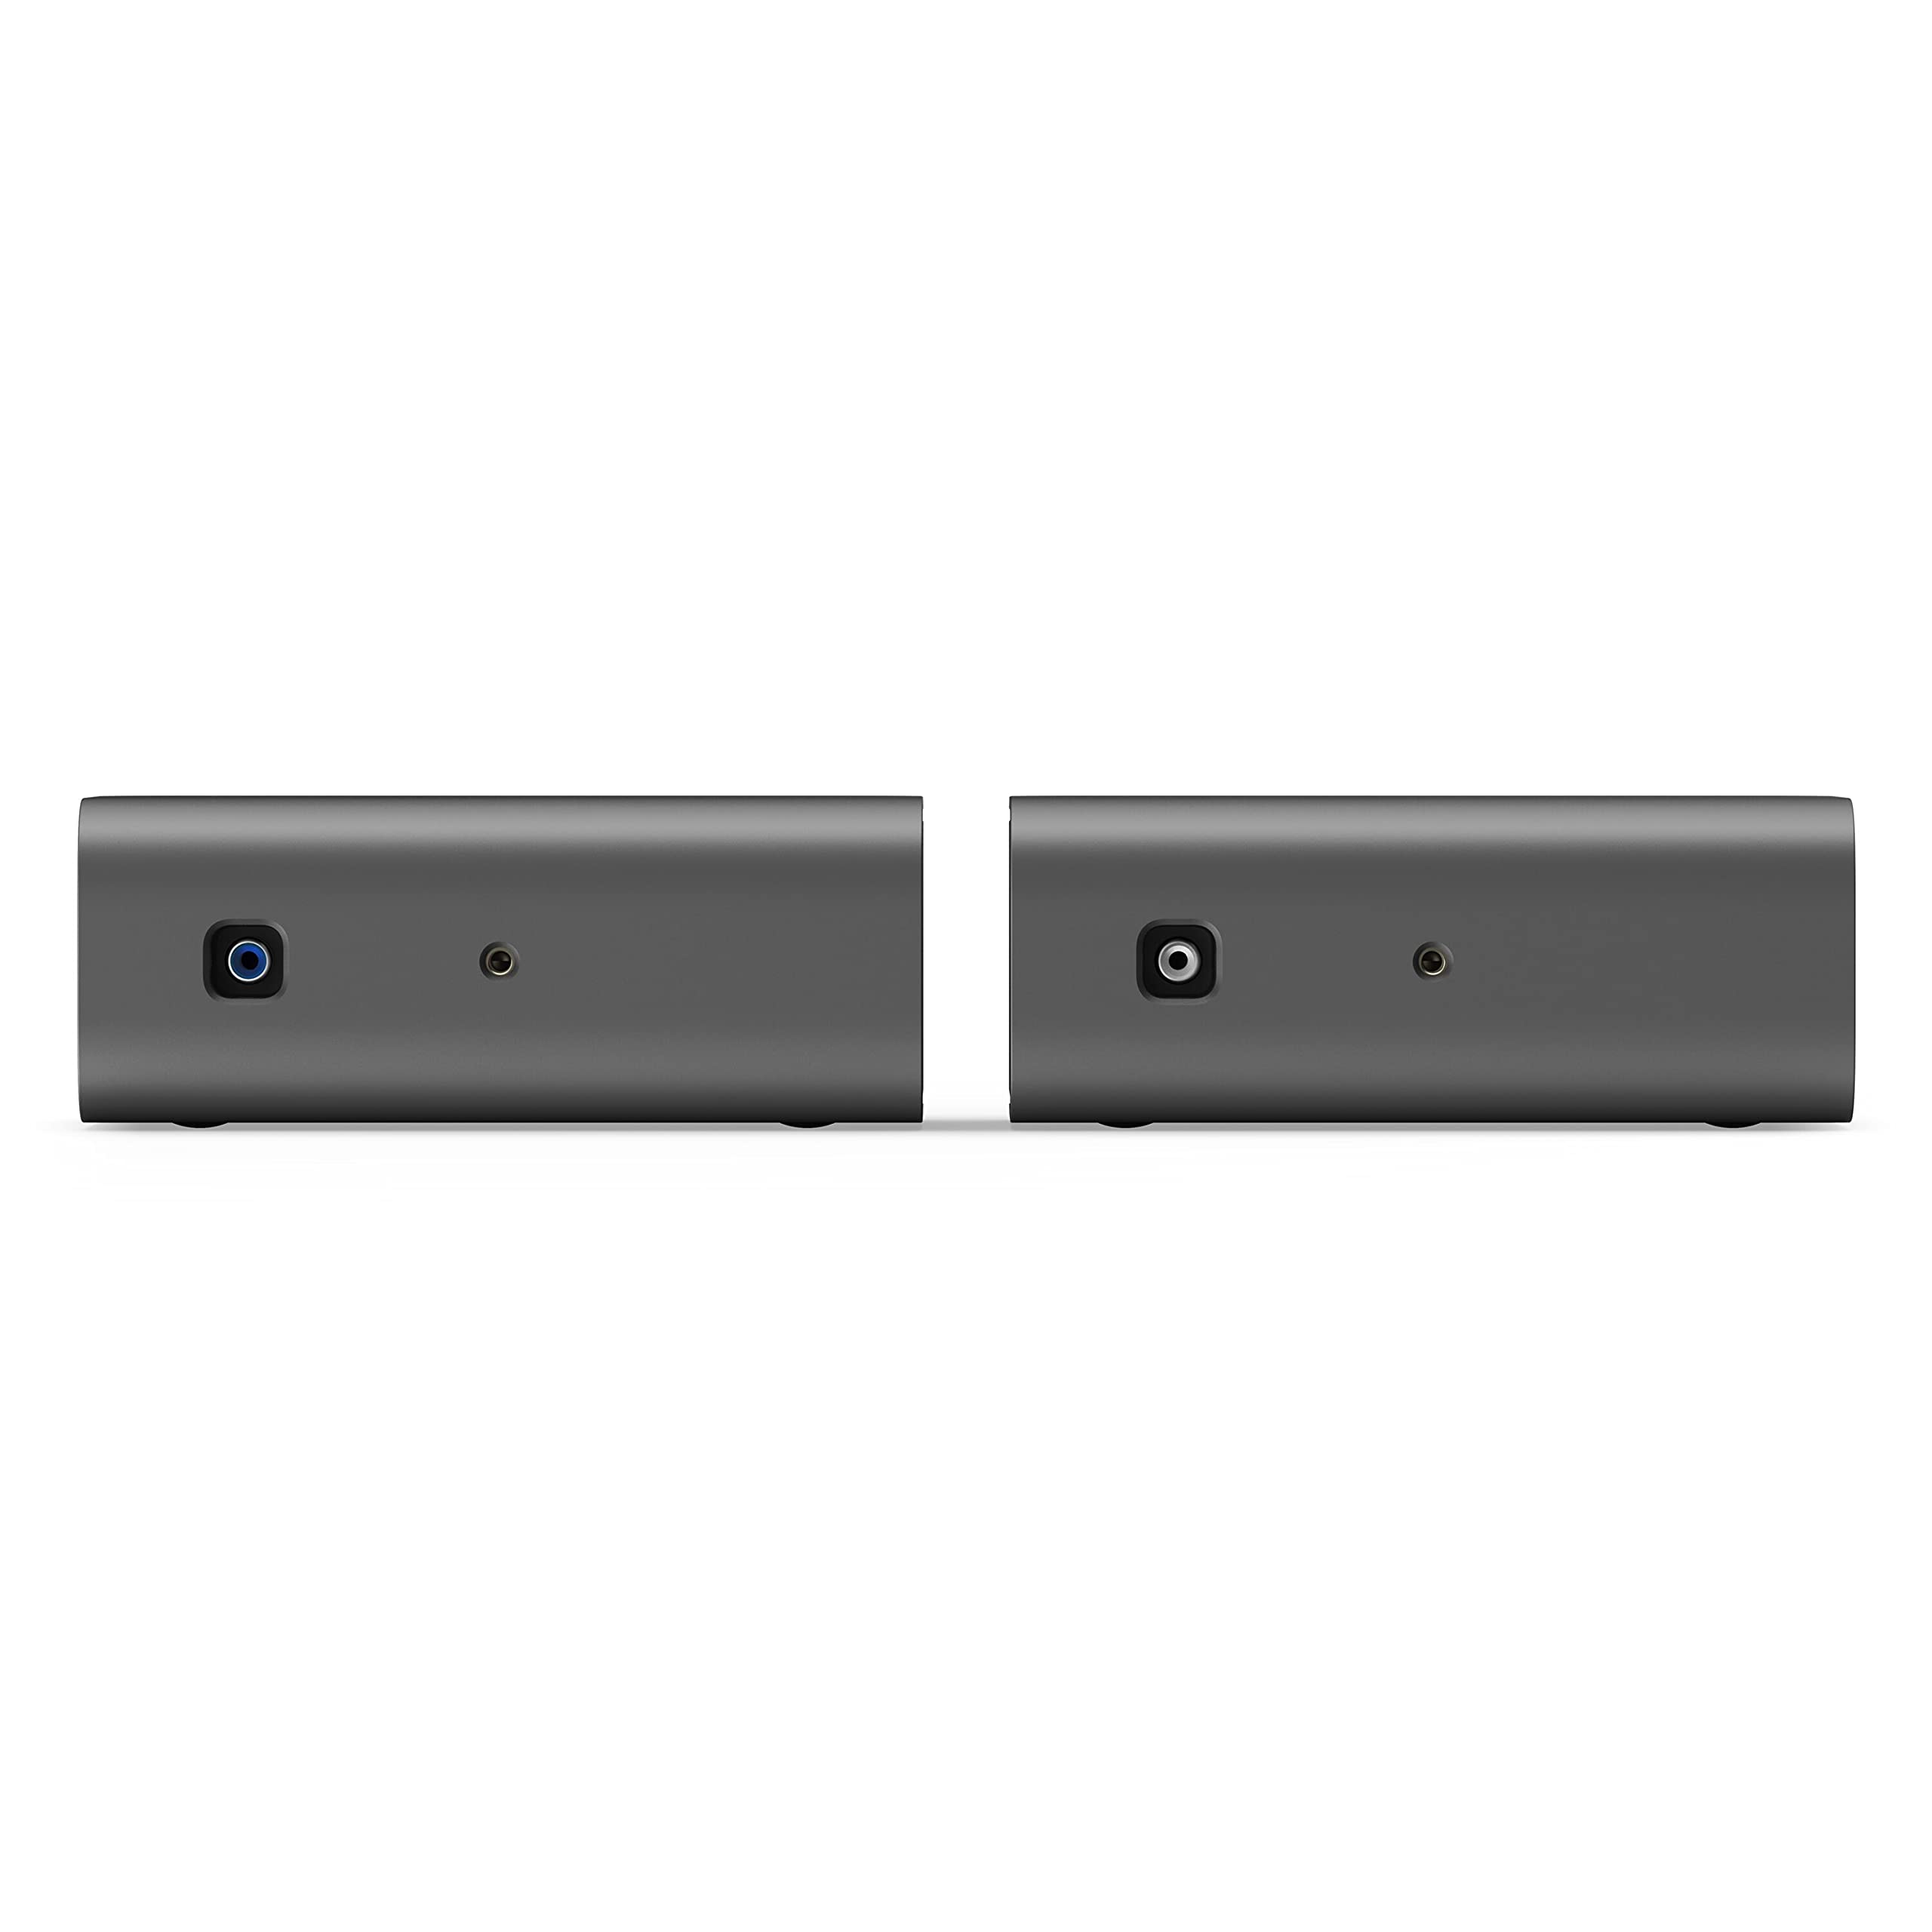 VIZIO M-Series 5.1 Premium Sound Bar with Dolby Atmos, DTS:X, Bluetooth, Wireless Subwoofer and Alexa Compatibility, M51ax-J6, 2022 Model